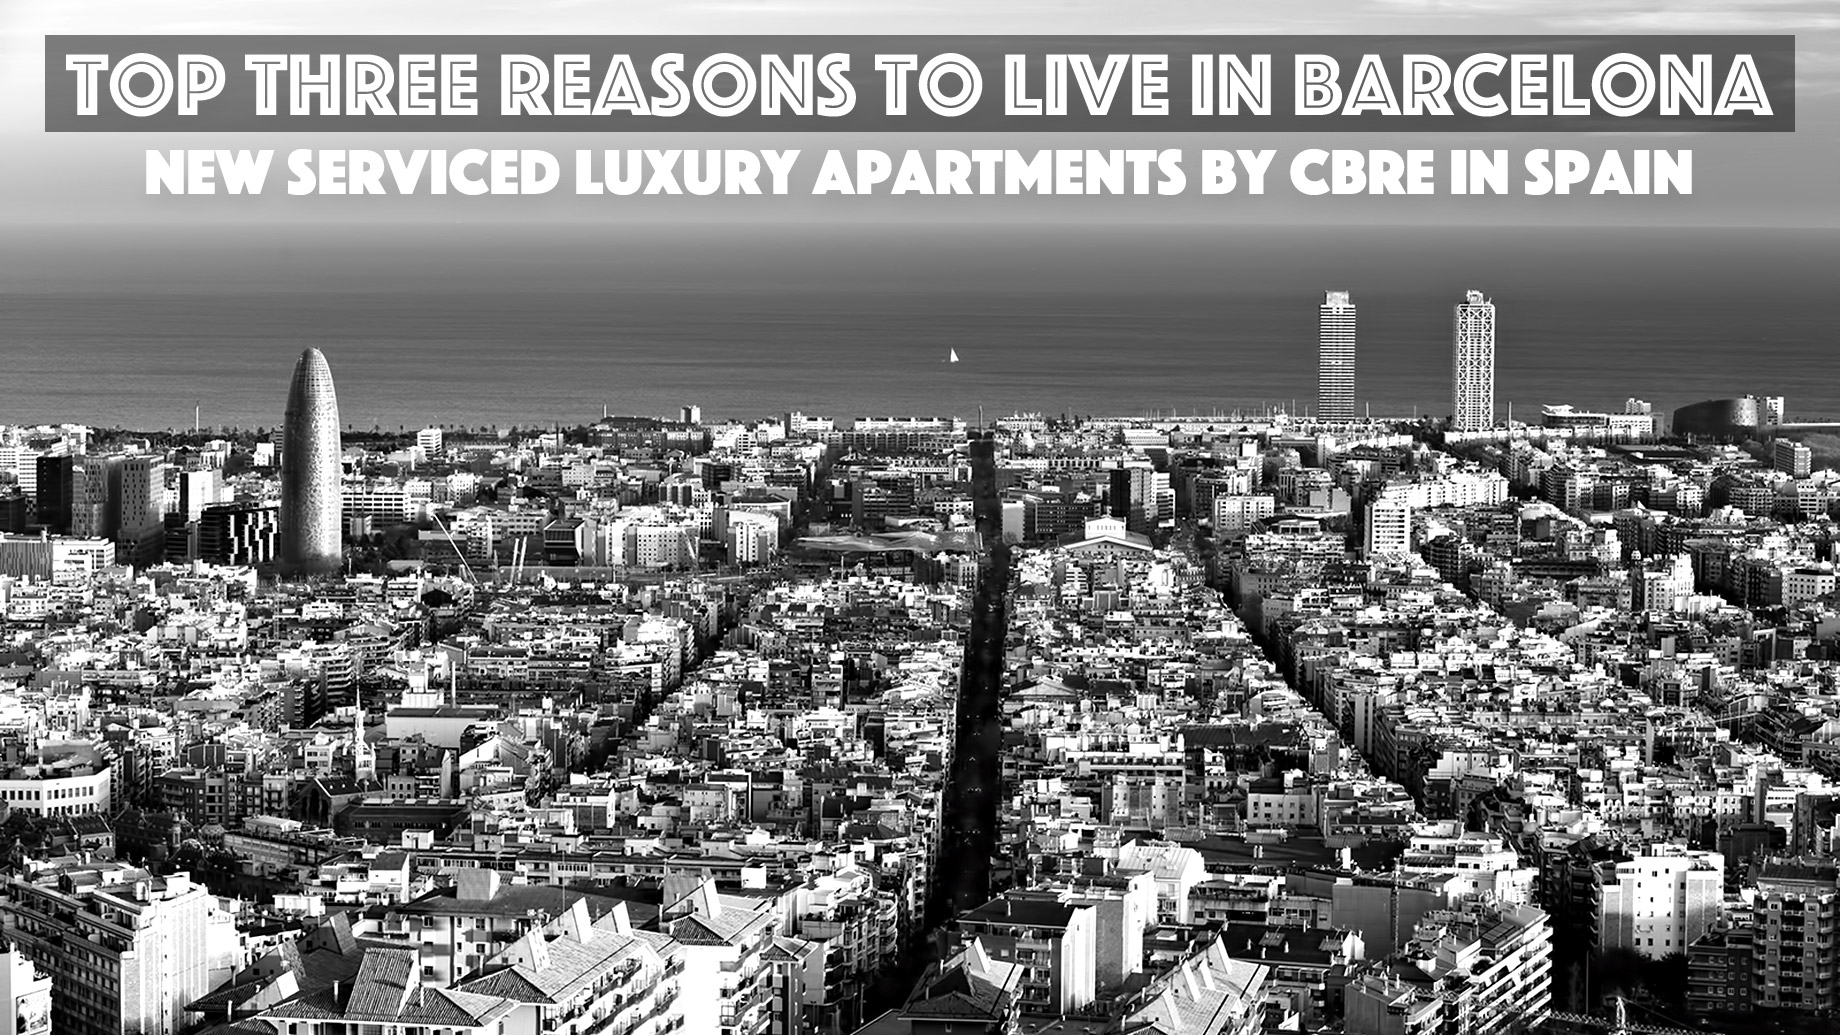 Top Three Reasons to Live in Barcelona - New Serviced Luxury Apartments by CBRE in Spain